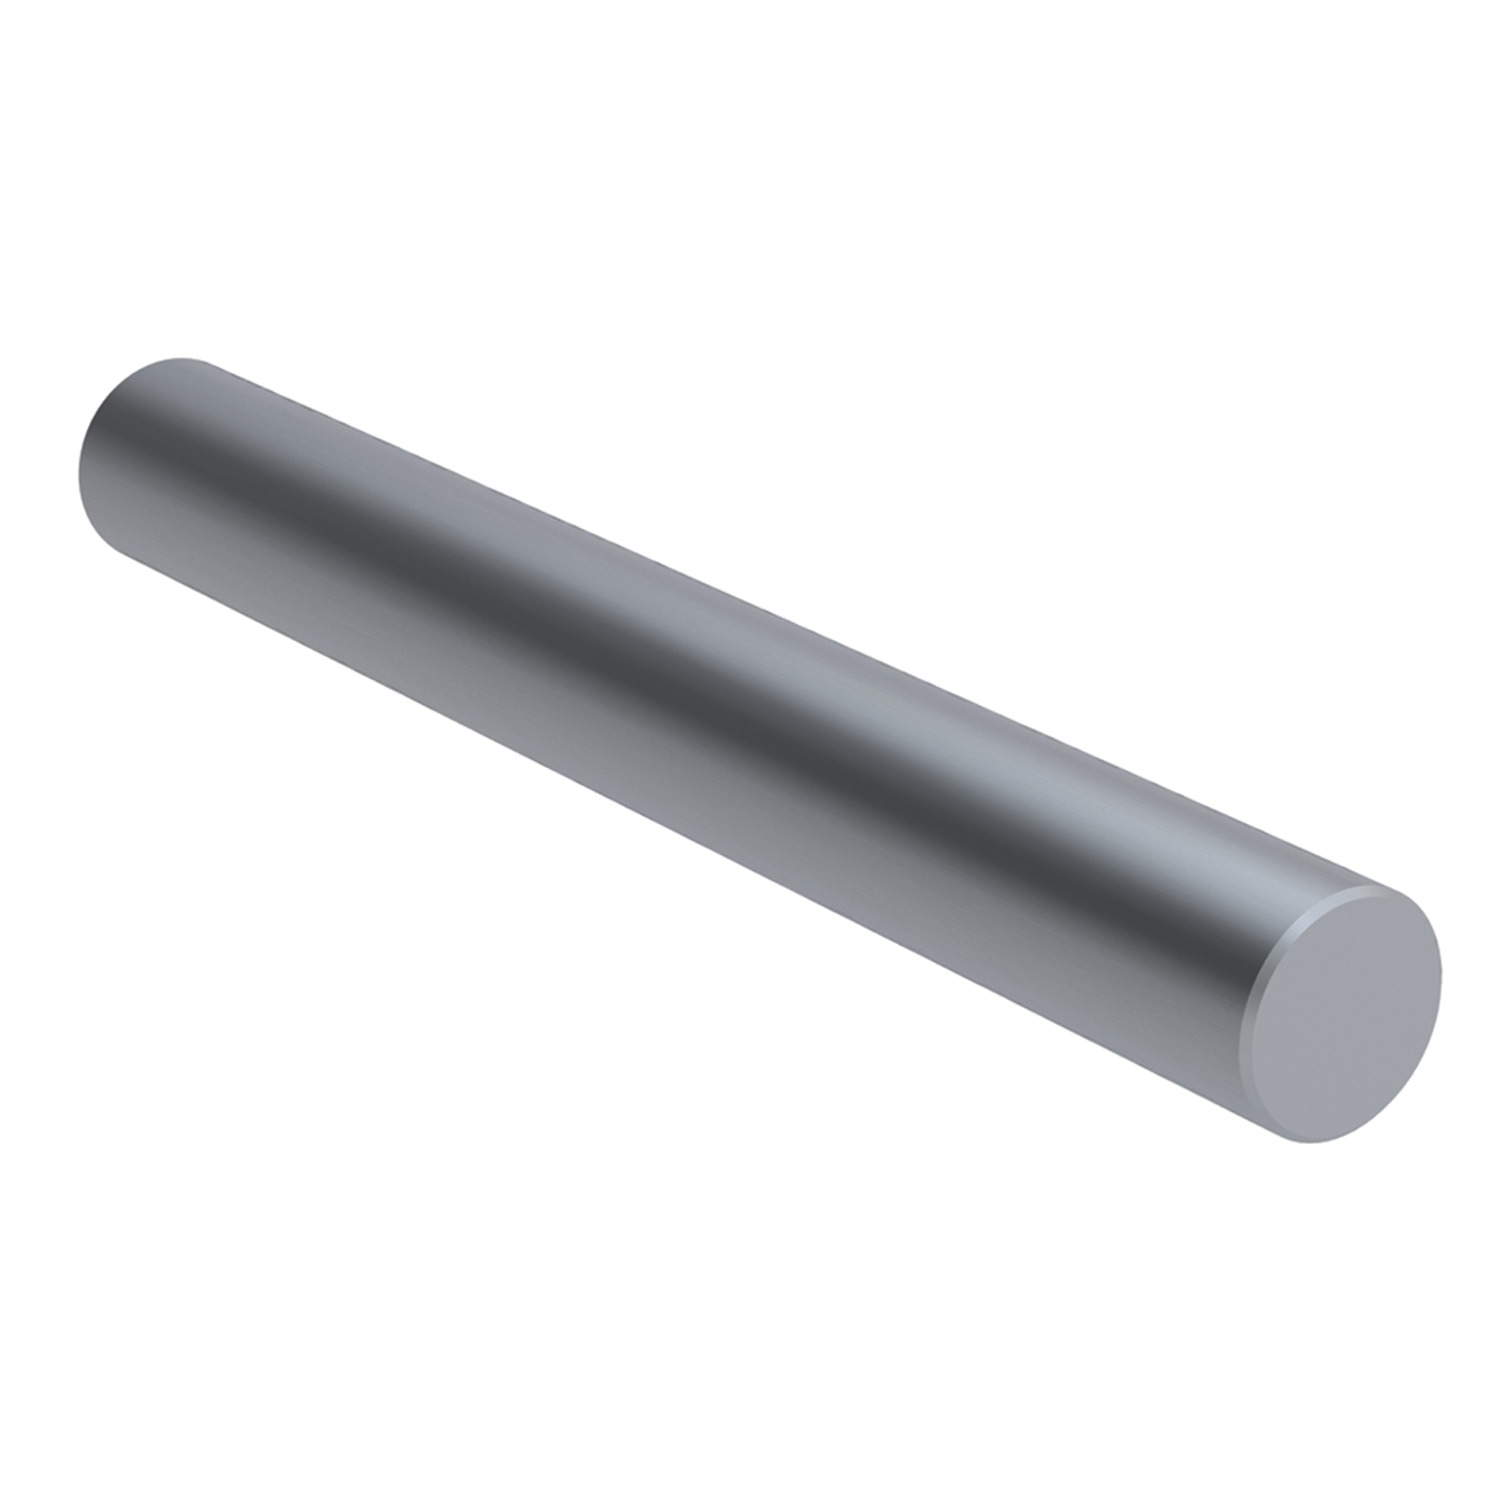 Product L1772.10, Ø10 Hardened Stainless Shafts for linear bearings / 